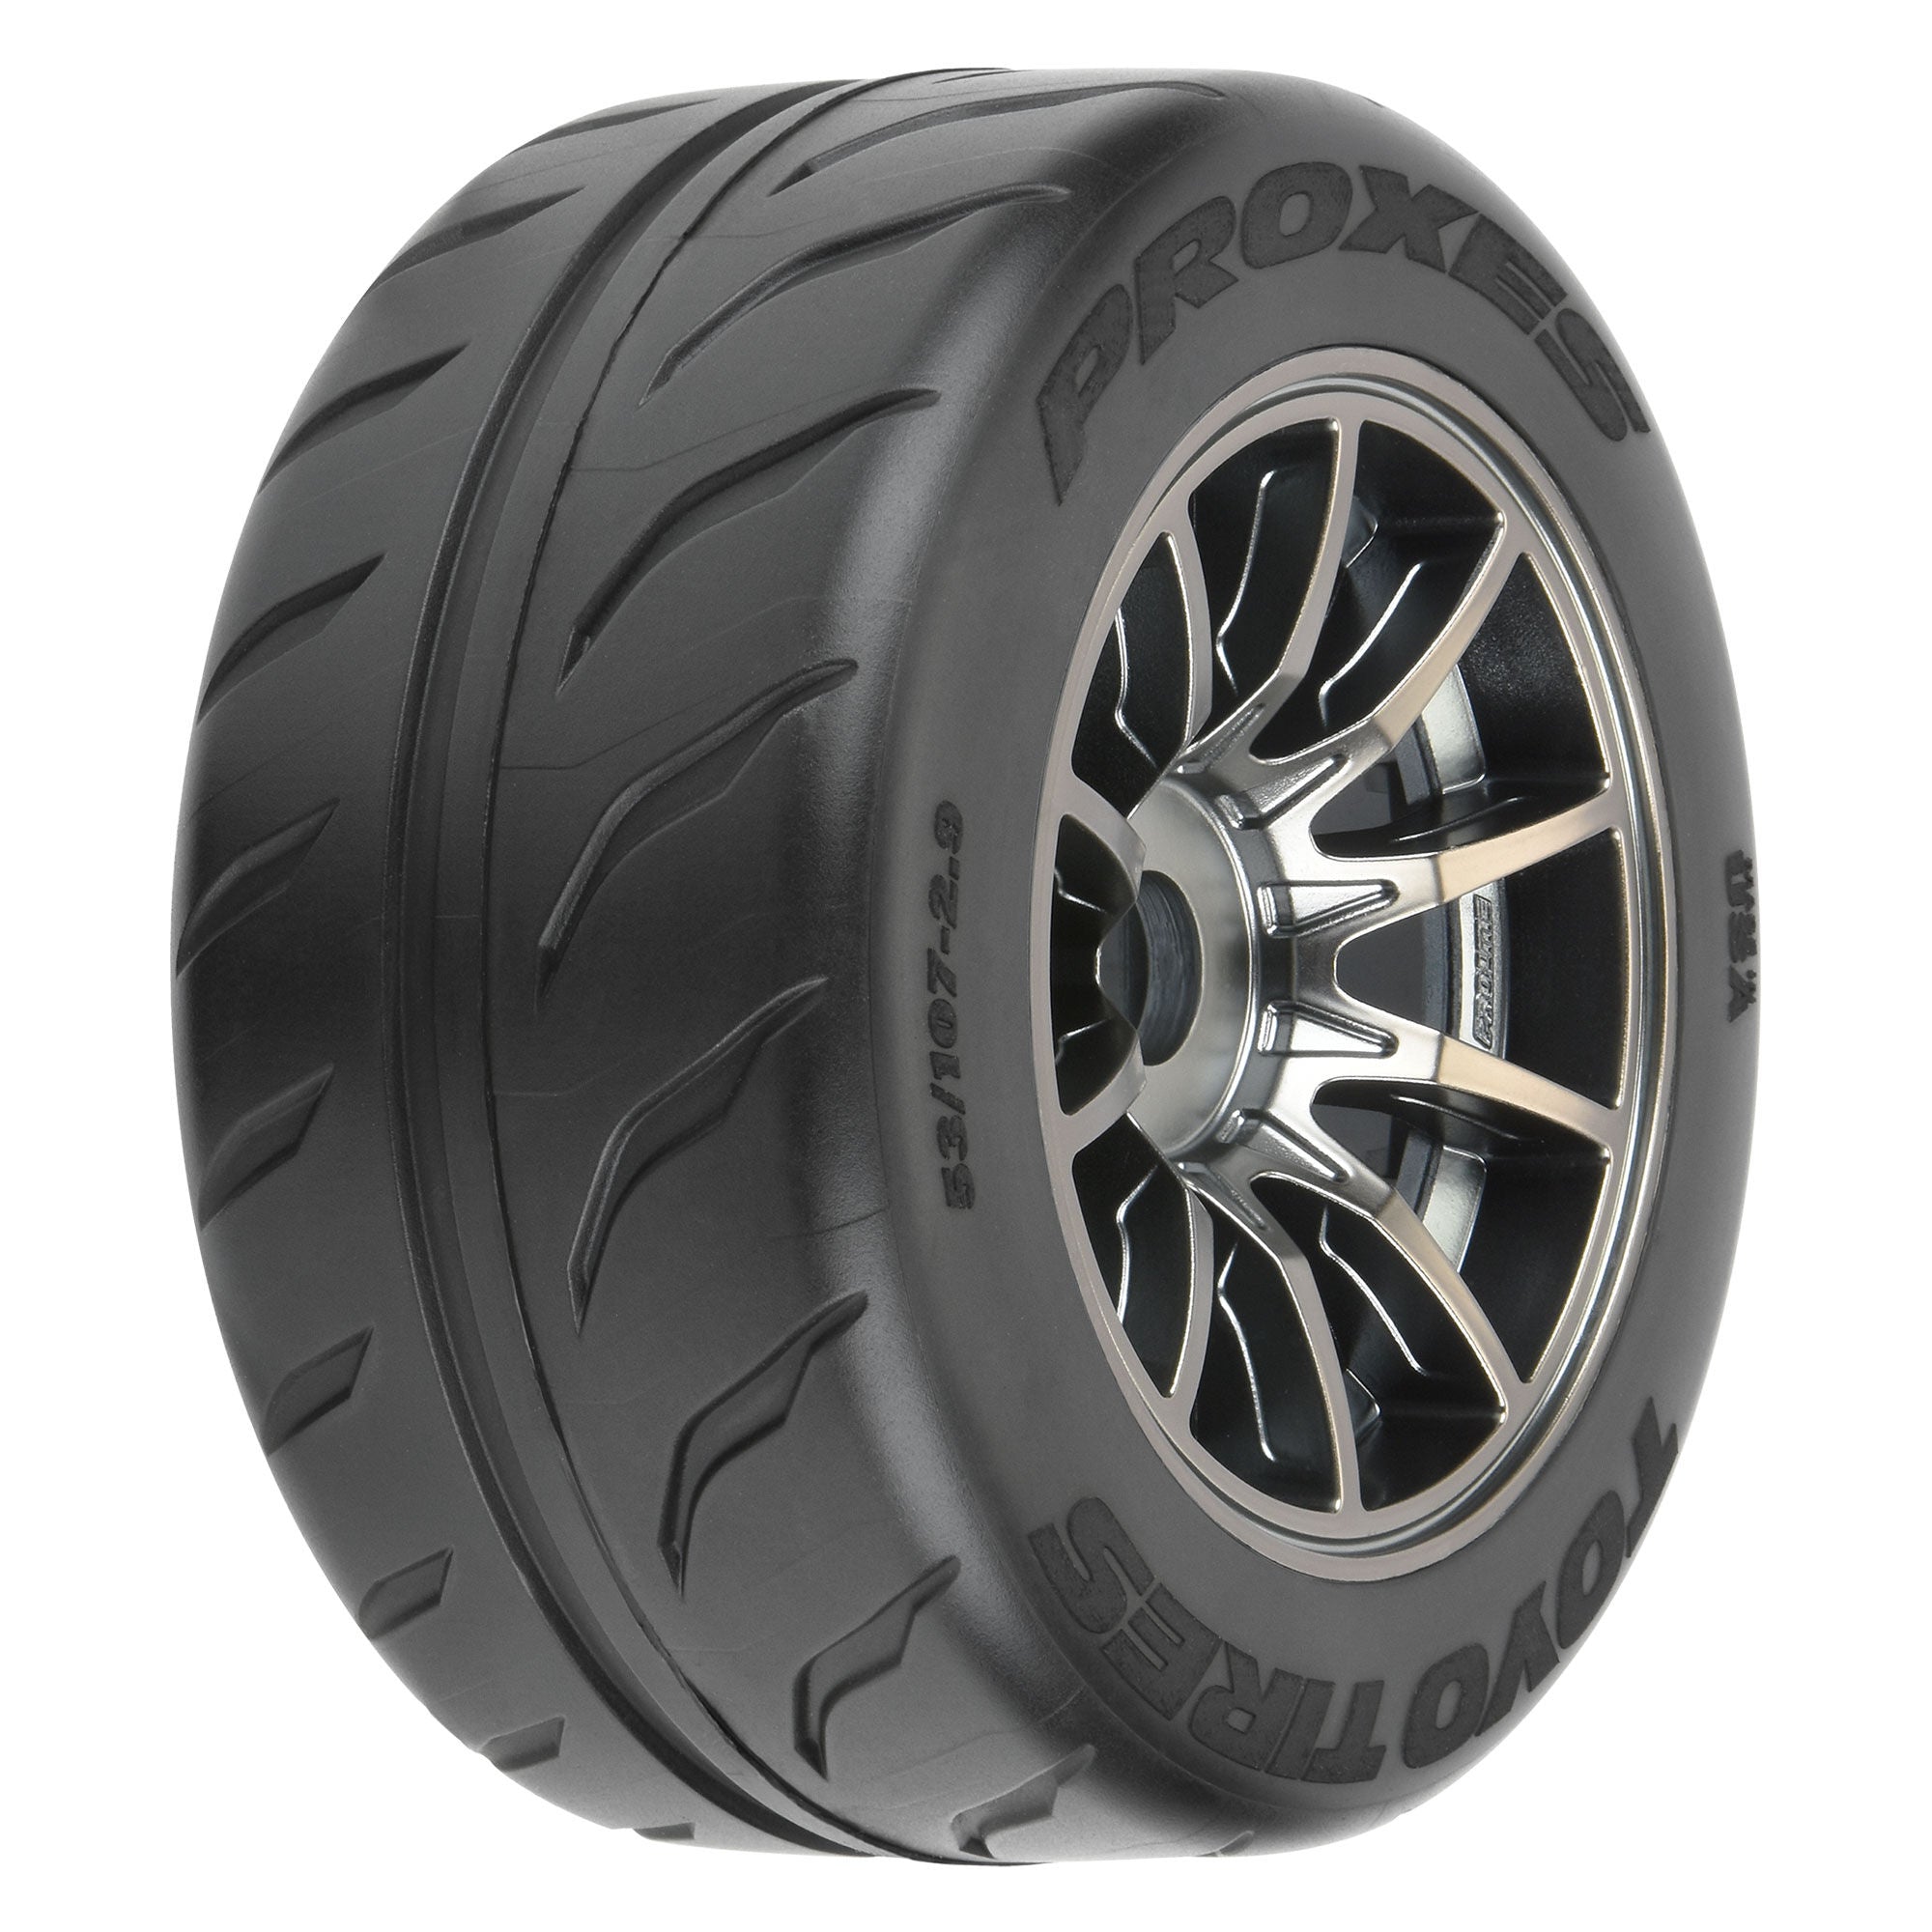 PRO-LINE Toyo® Proxes R888R™ 53/107 2.9 S3 (Soft) mounted BELTED Stre